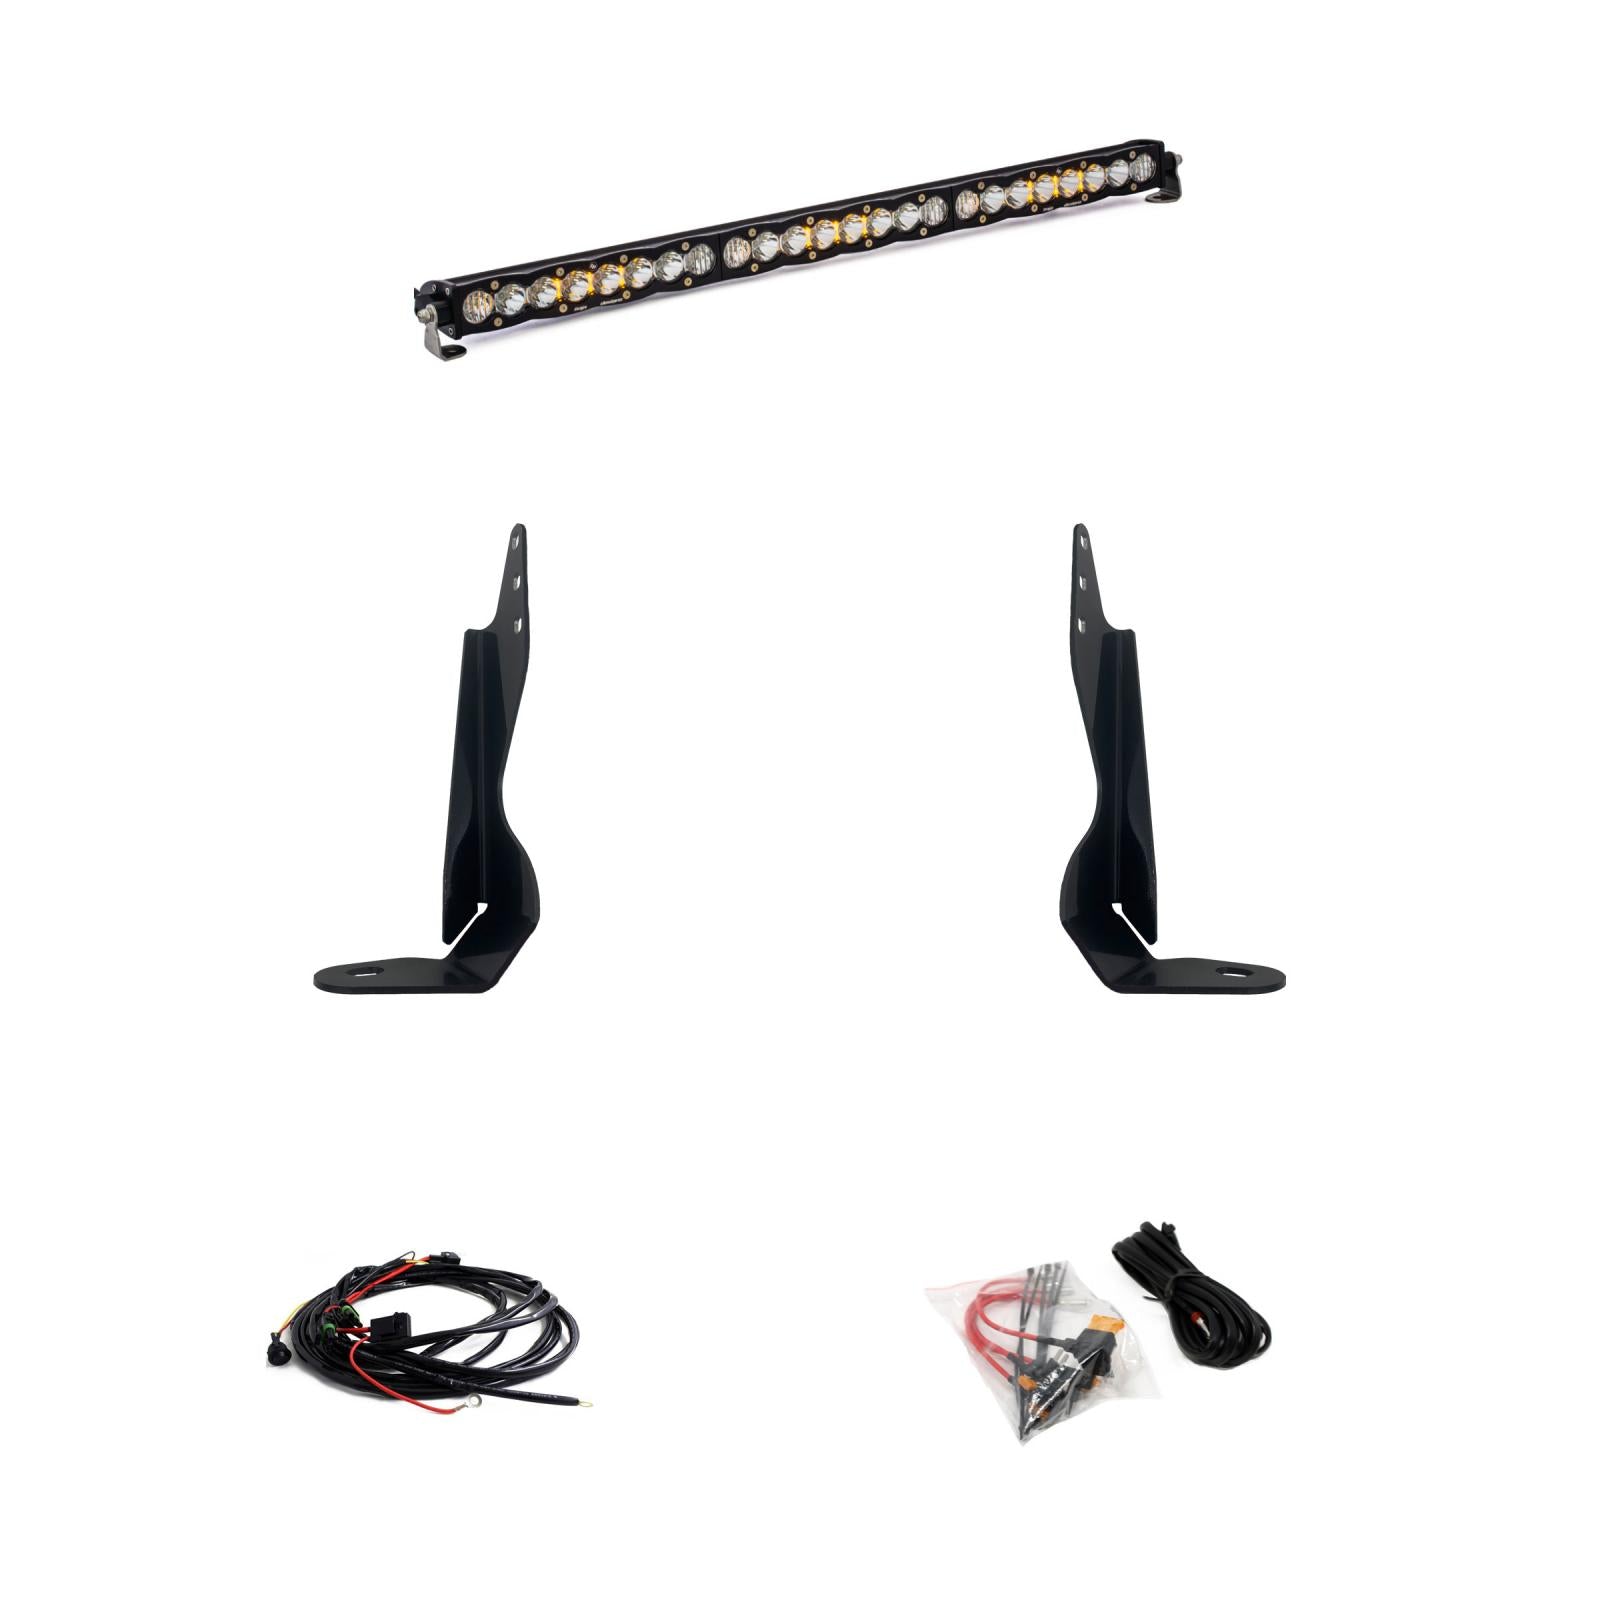 '20-22 Chevy/GMC 2500/3500 Baja Designs 30" S8 Behind the Grille LED Light Bar Kit parts